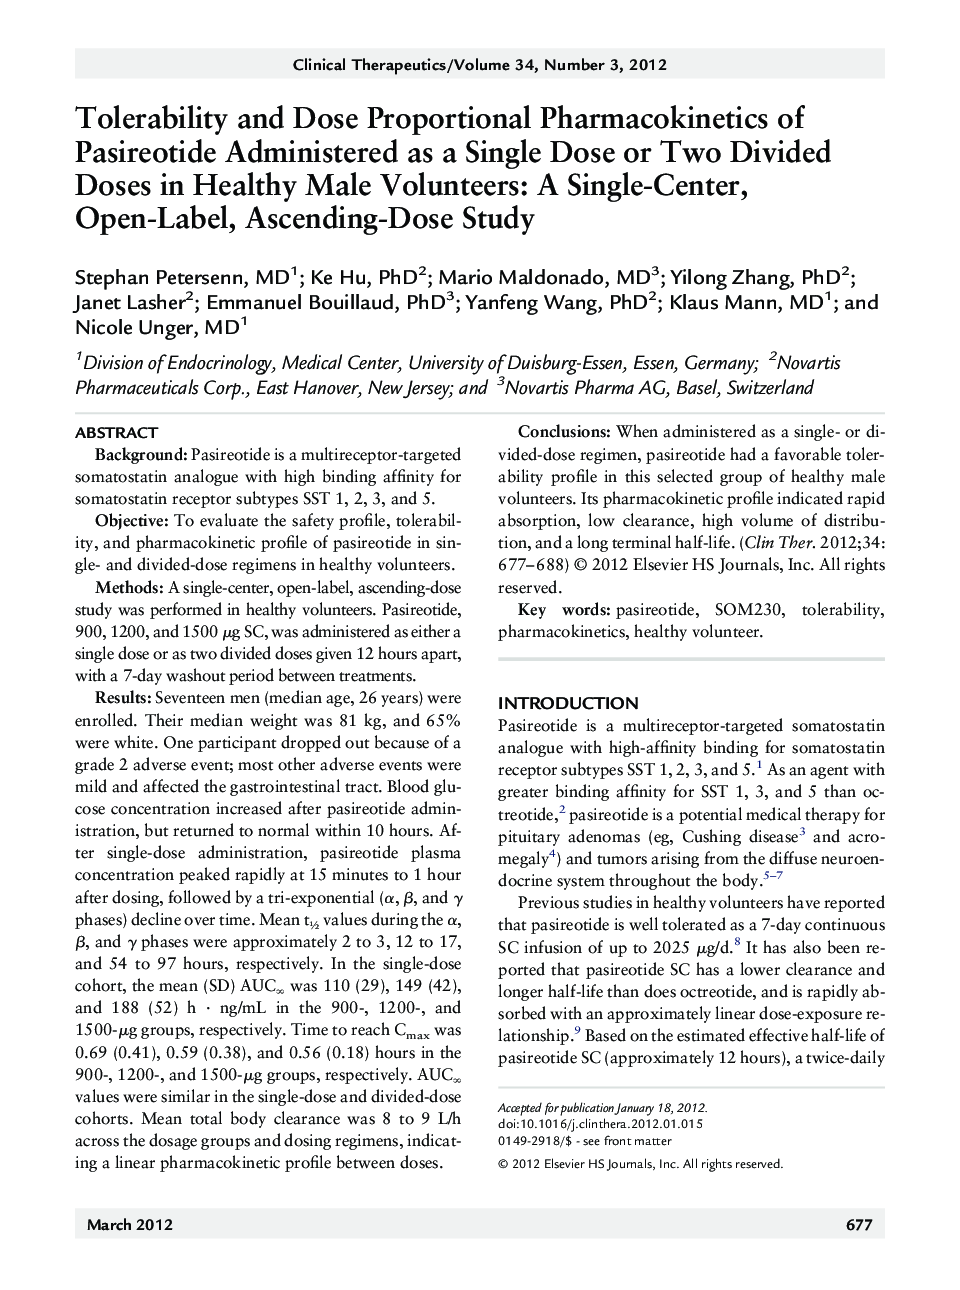 Tolerability and Dose Proportional Pharmacokinetics of Pasireotide Administered as a Single Dose or Two Divided Doses in Healthy Male Volunteers: A Single-Center, Open-Label, Ascending-Dose Study